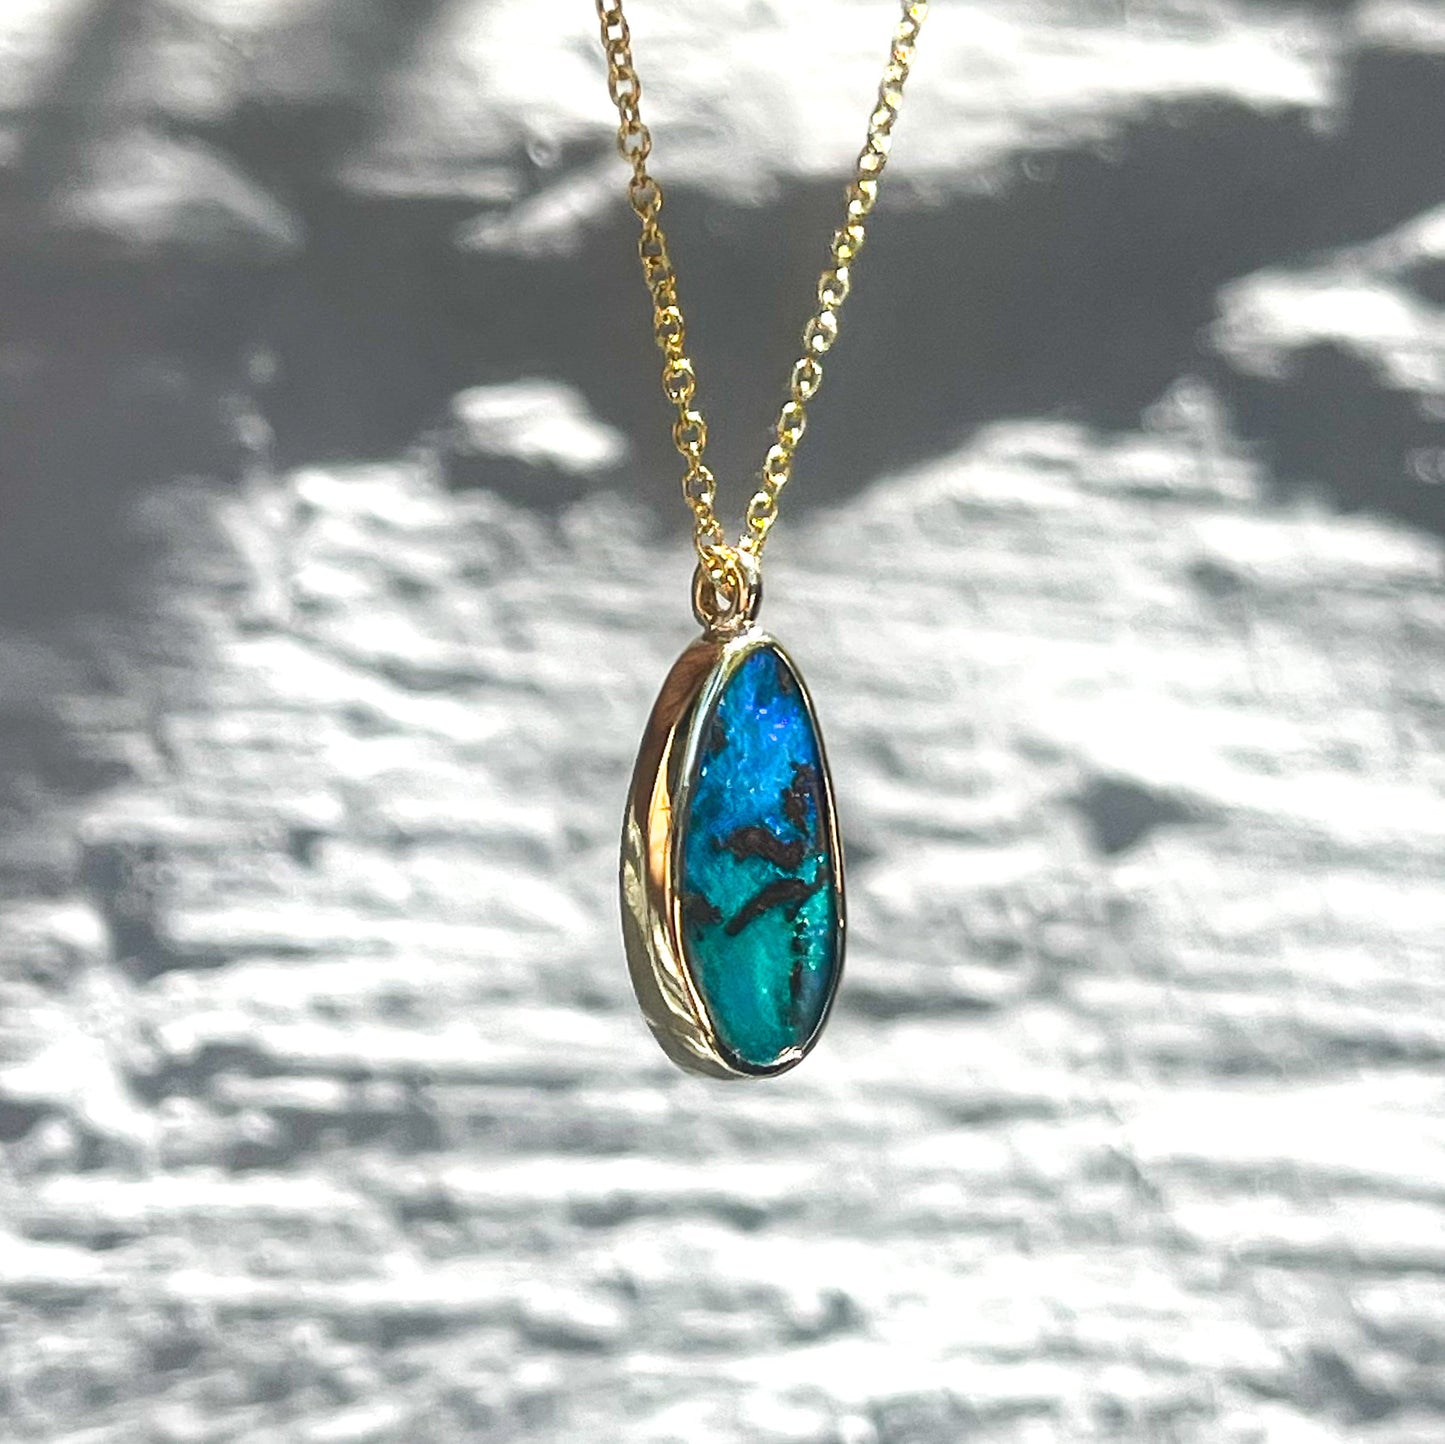 An Australian Opal Necklace by NIXIN Jewelry shown in shade and in semi-profile. Image displays the side of the gold bezel setting and the depth of the opal stone.